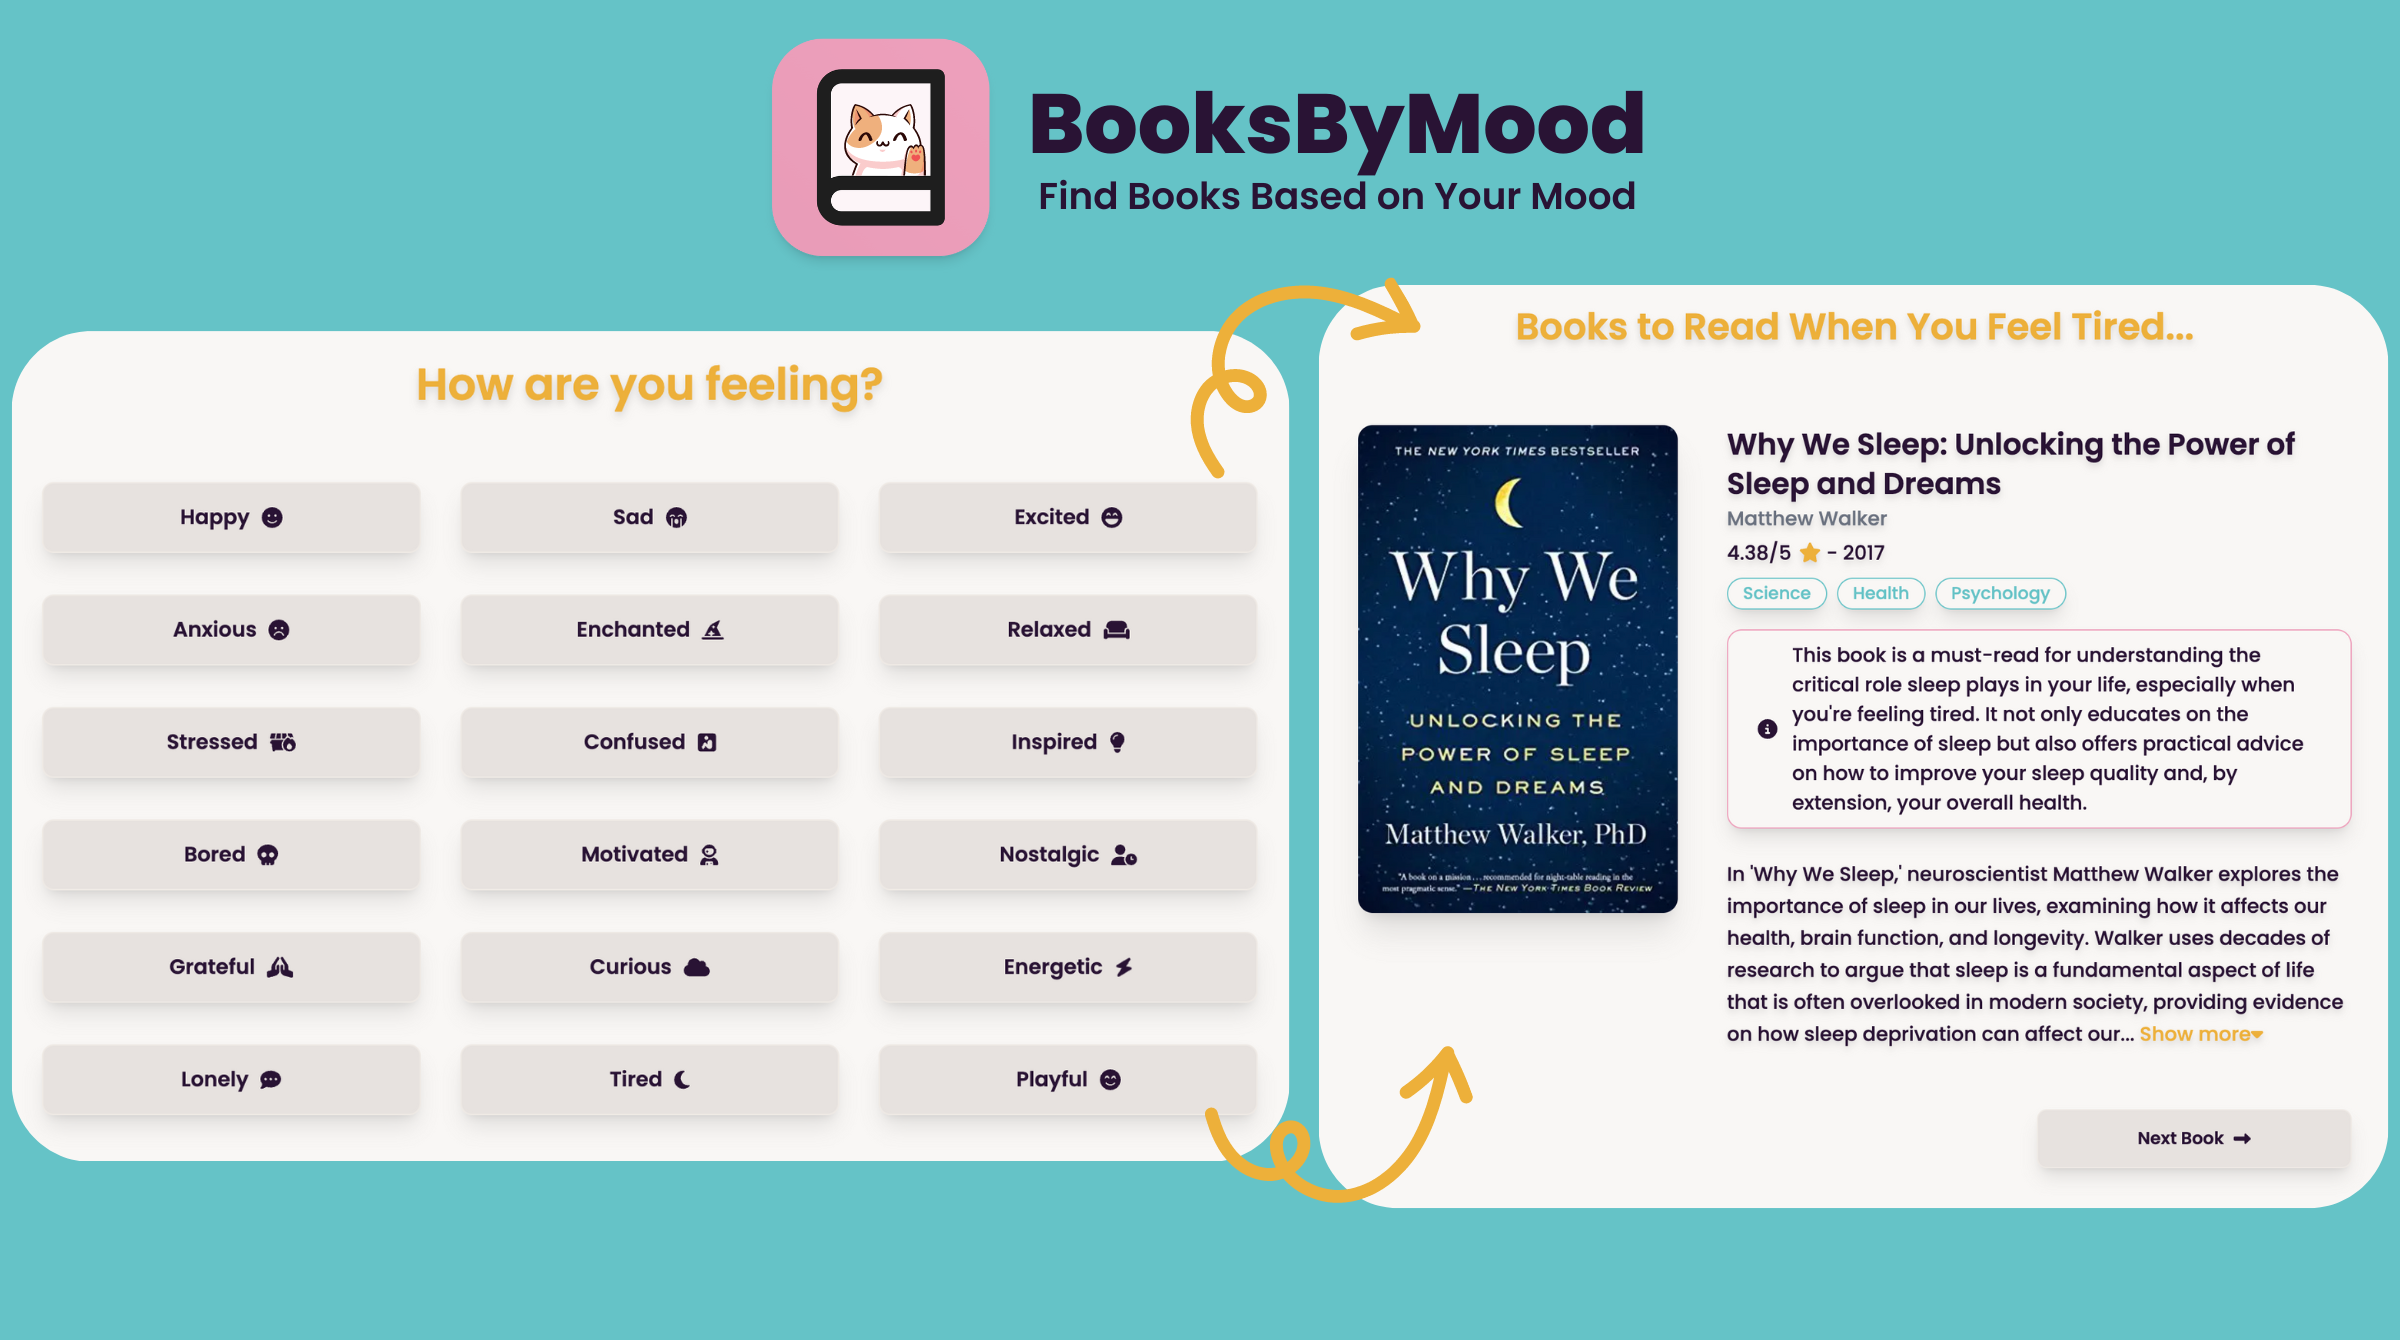 booksbymood - Find books based on your mood